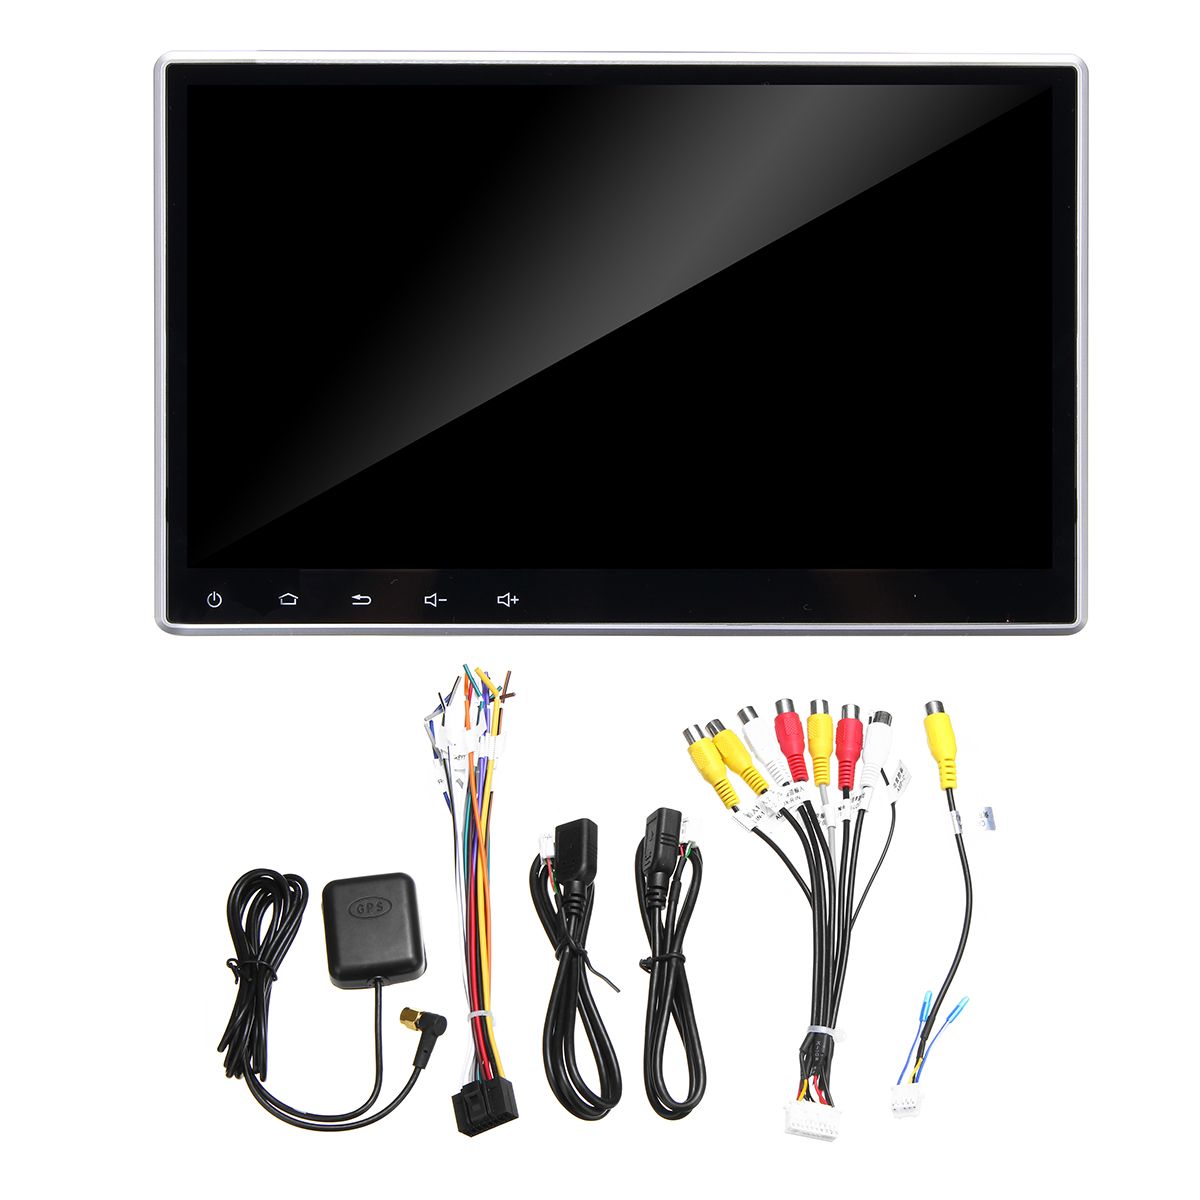 101-Inch-2-Din-for-Android-81-Car-Stereo-Radio-Adjustable-Touch-Screen-8-Core-2GB32GB-In-Dash-Multim-1630830